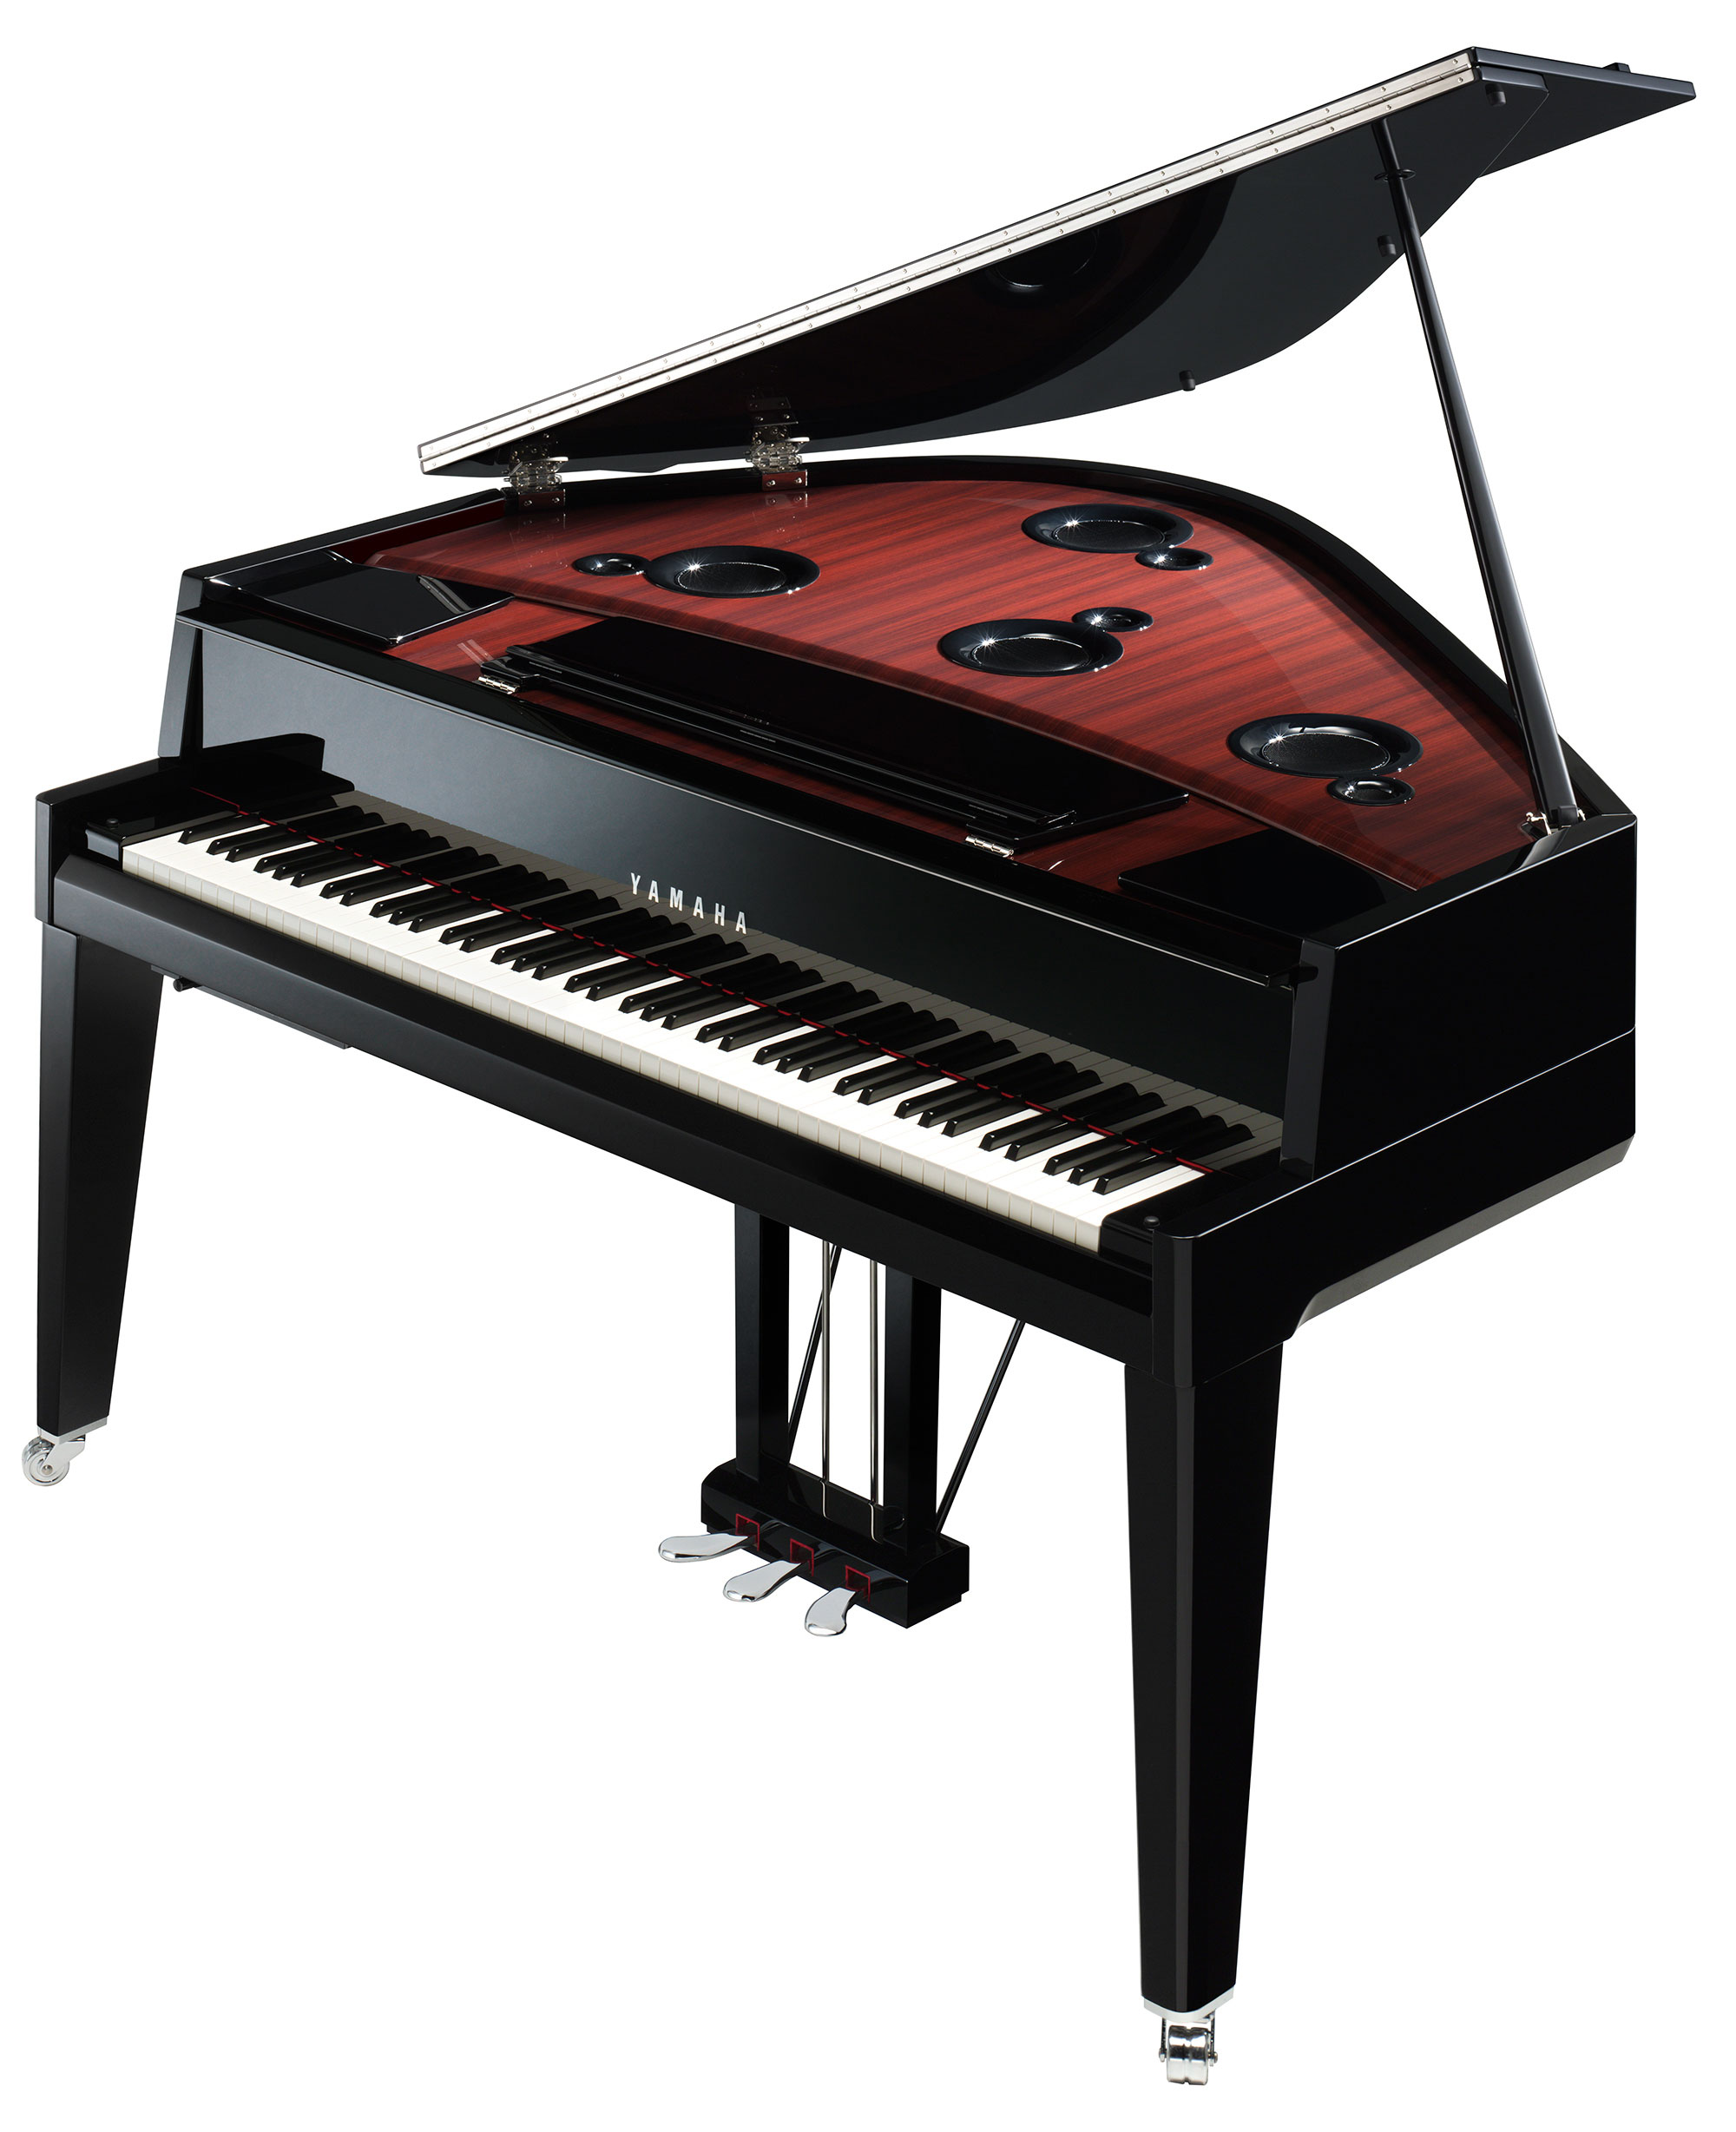 Yamaha N3x - LaquÉ Noir - Digital piano with stand - Variation 2